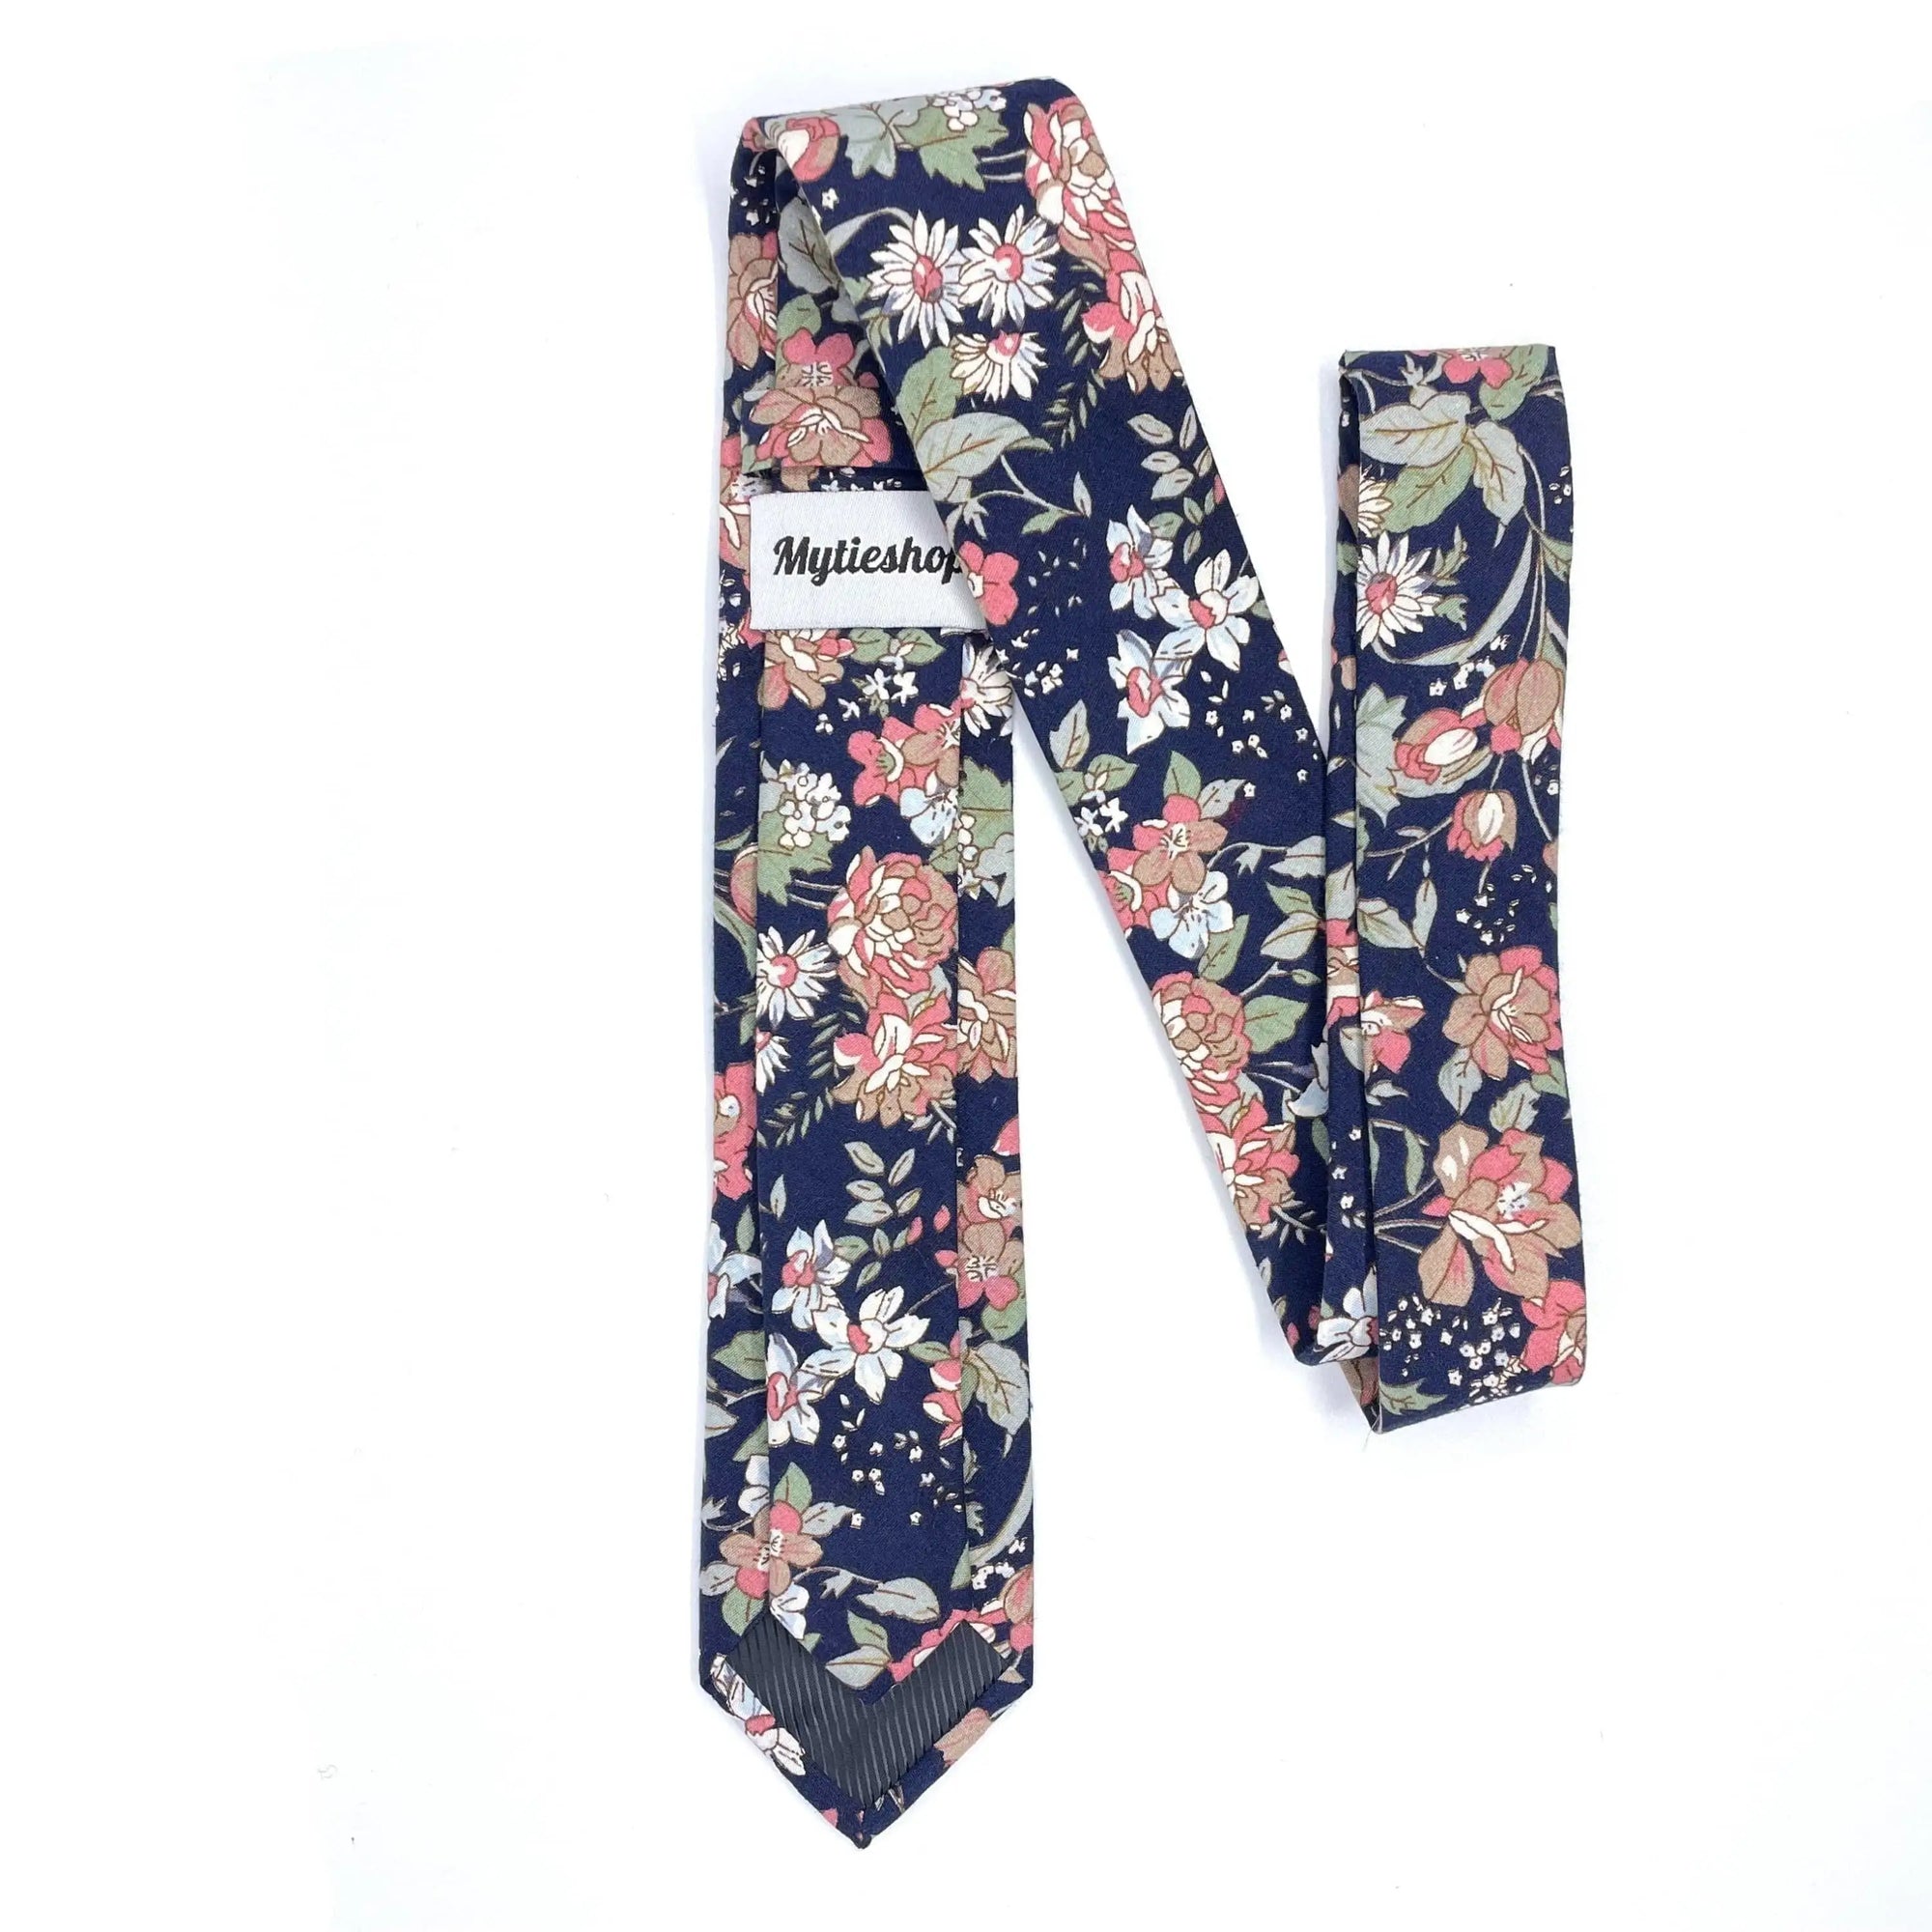 Blue Floral Skinny Tie 2.36” ASPEN - MYTIESHOP-Neckties-Blue Floral Skinny Tie with green and pink flowers. Floral print neckties for weddings and groomsmen attire. Wedding ties, skinny ties. Blue skinny tie.-Mytieshop. Skinny ties for weddings anniversaries. Father of bride. Groomsmen. Cool skinny neckties for men. Neckwear for prom, missions and fancy events. Gift ideas for men. Anniversaries ideas. Wedding aesthetics. Flower ties. Dry flower ties.